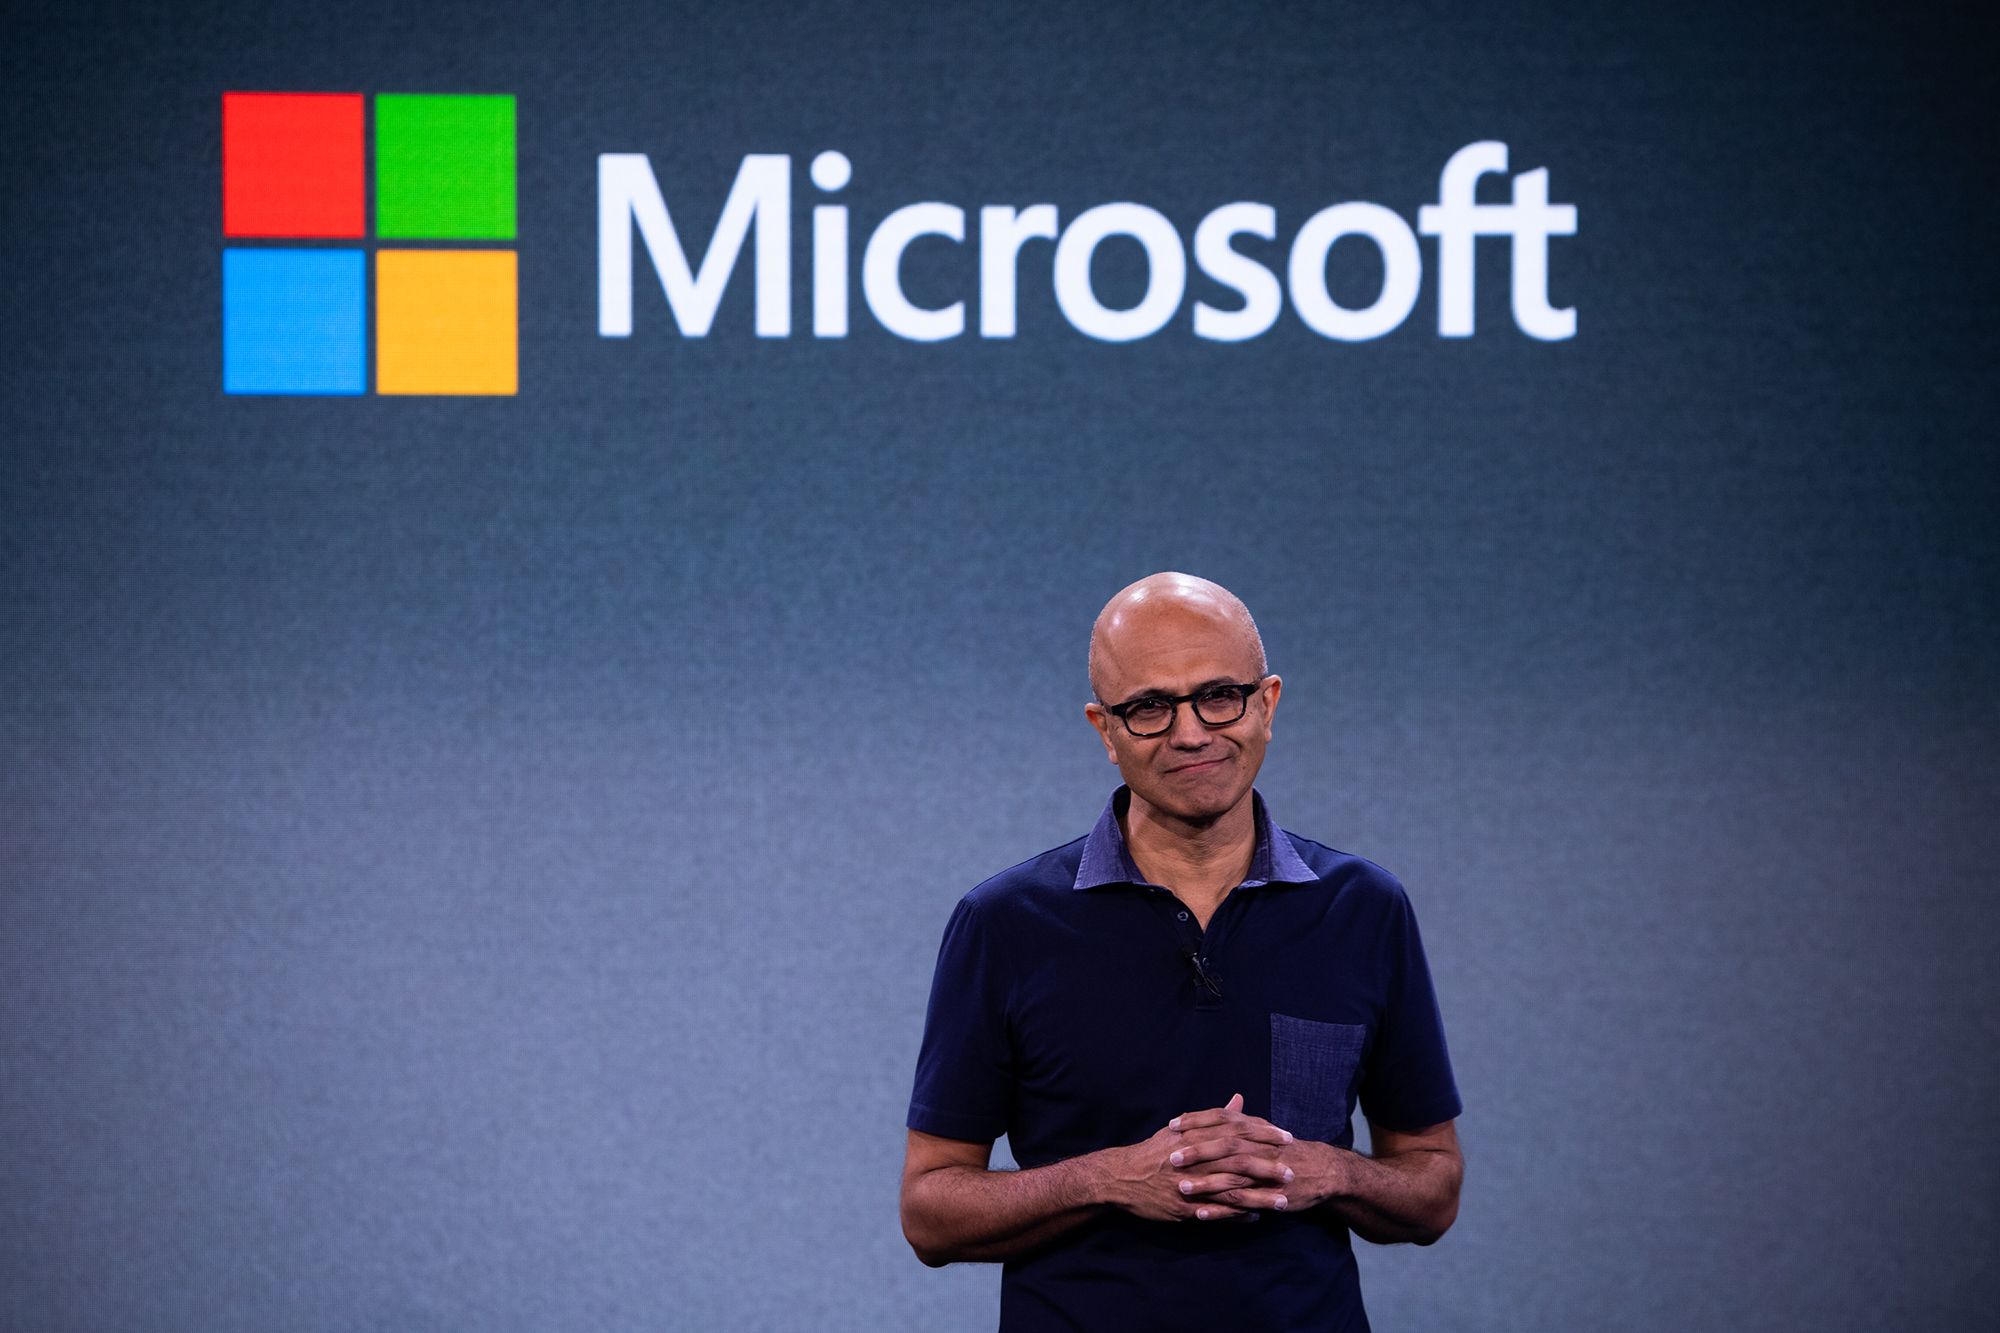 Microsoft also reportedly interested in purchasing Warner Bros